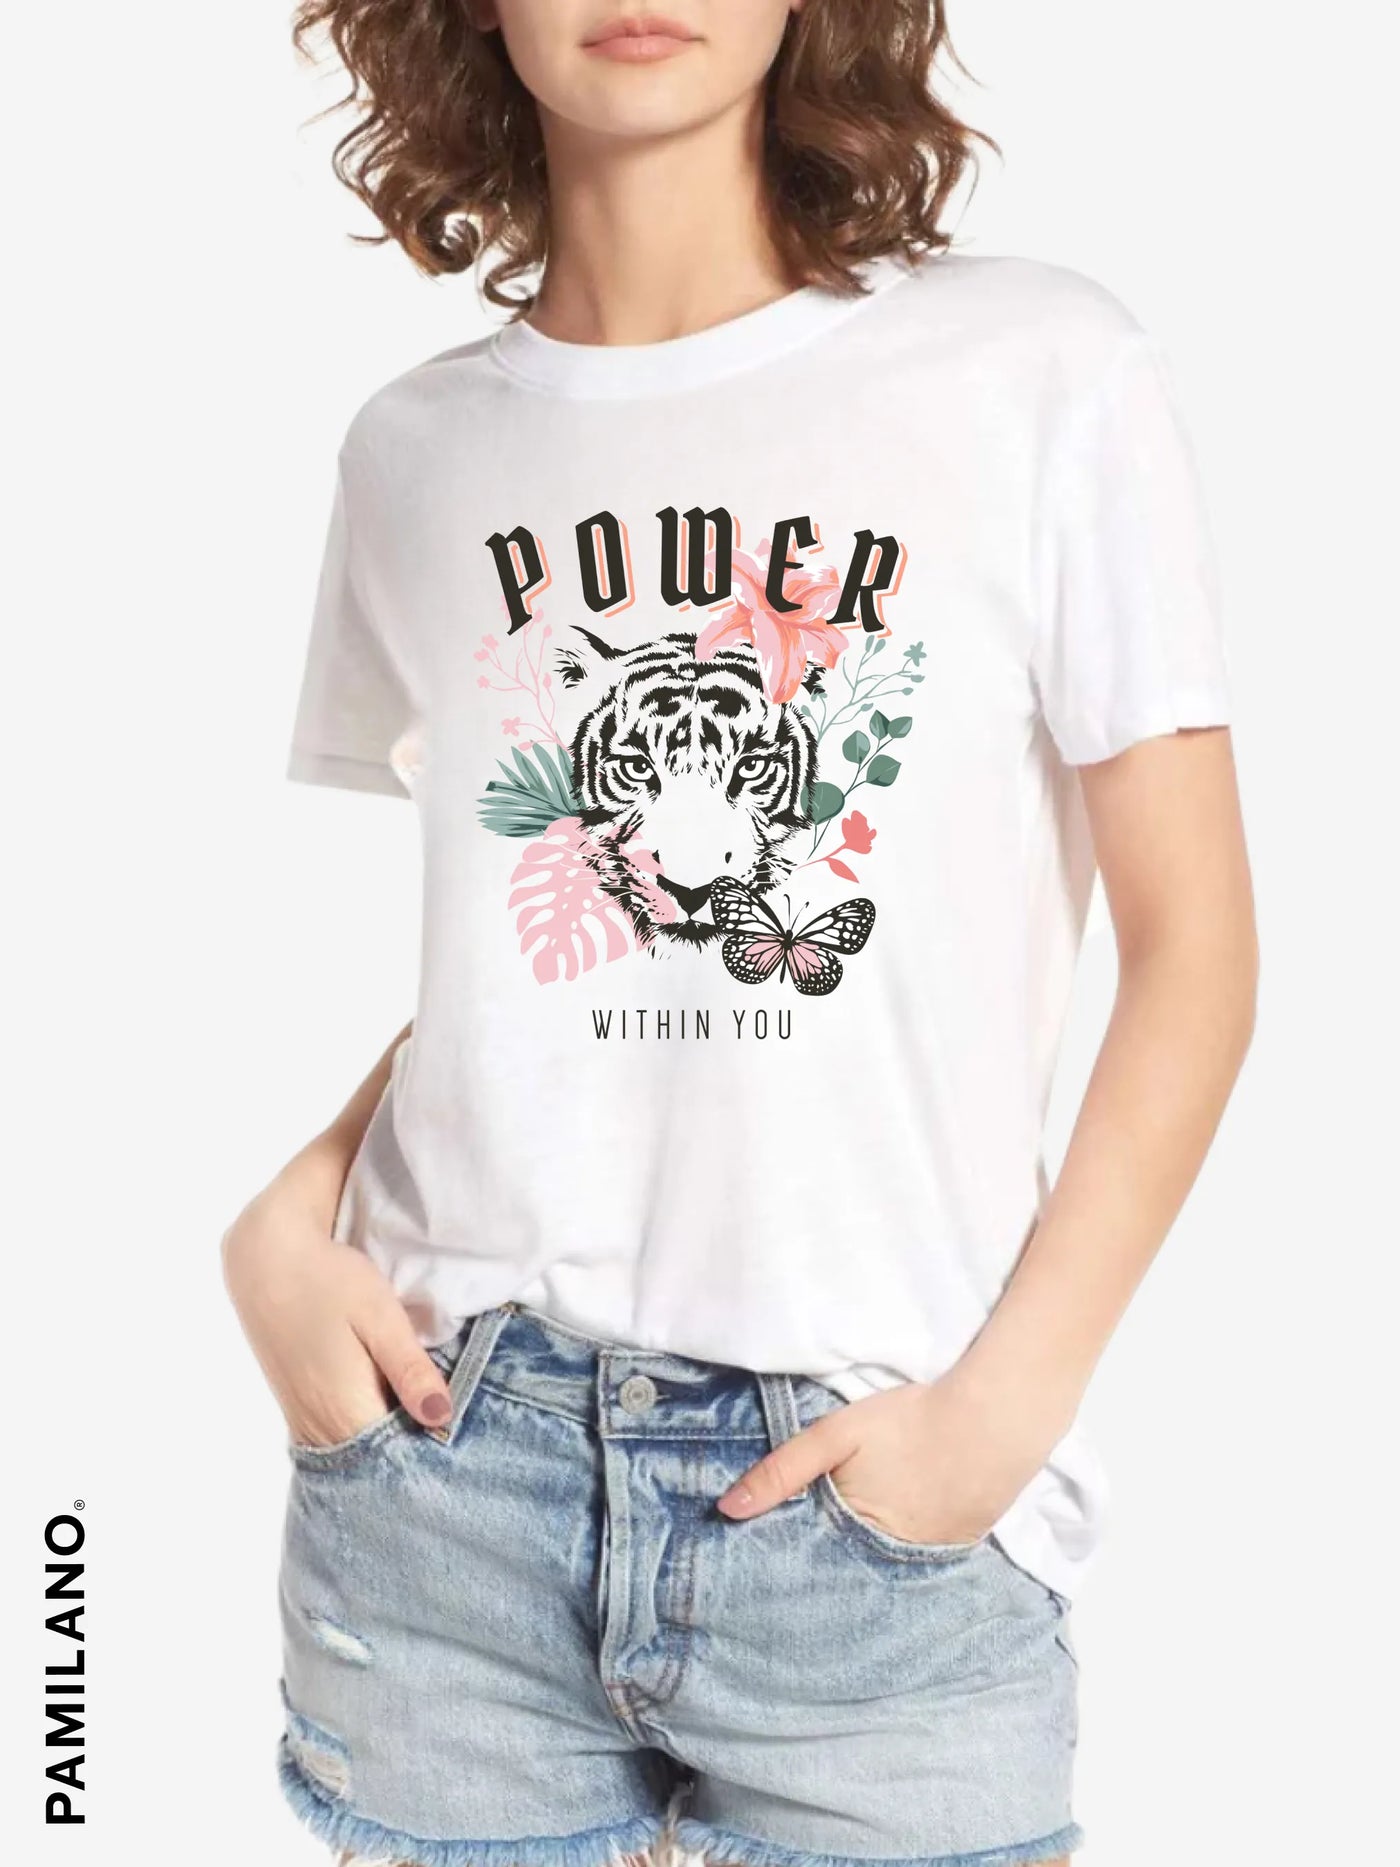 Power Within You Slogan - T-Shirt